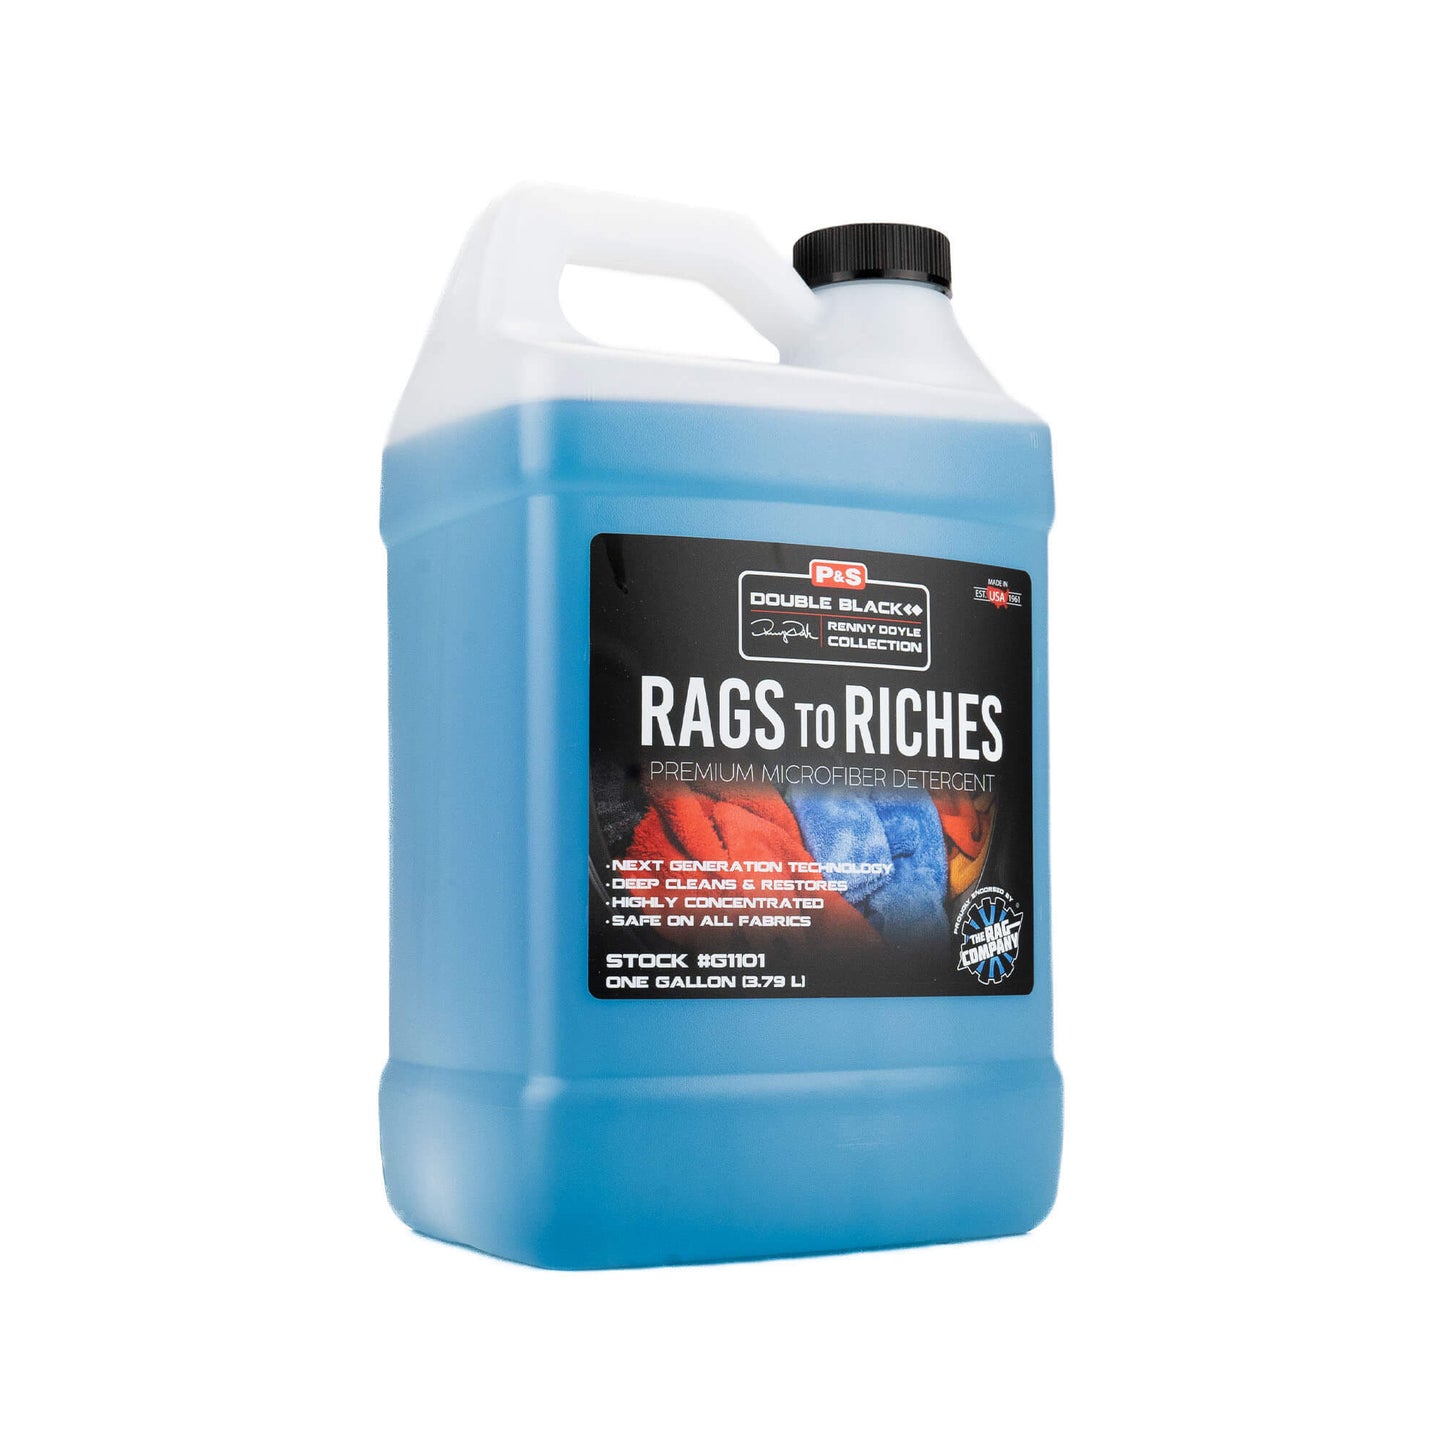 Rags To Riches Microfiber Detergent